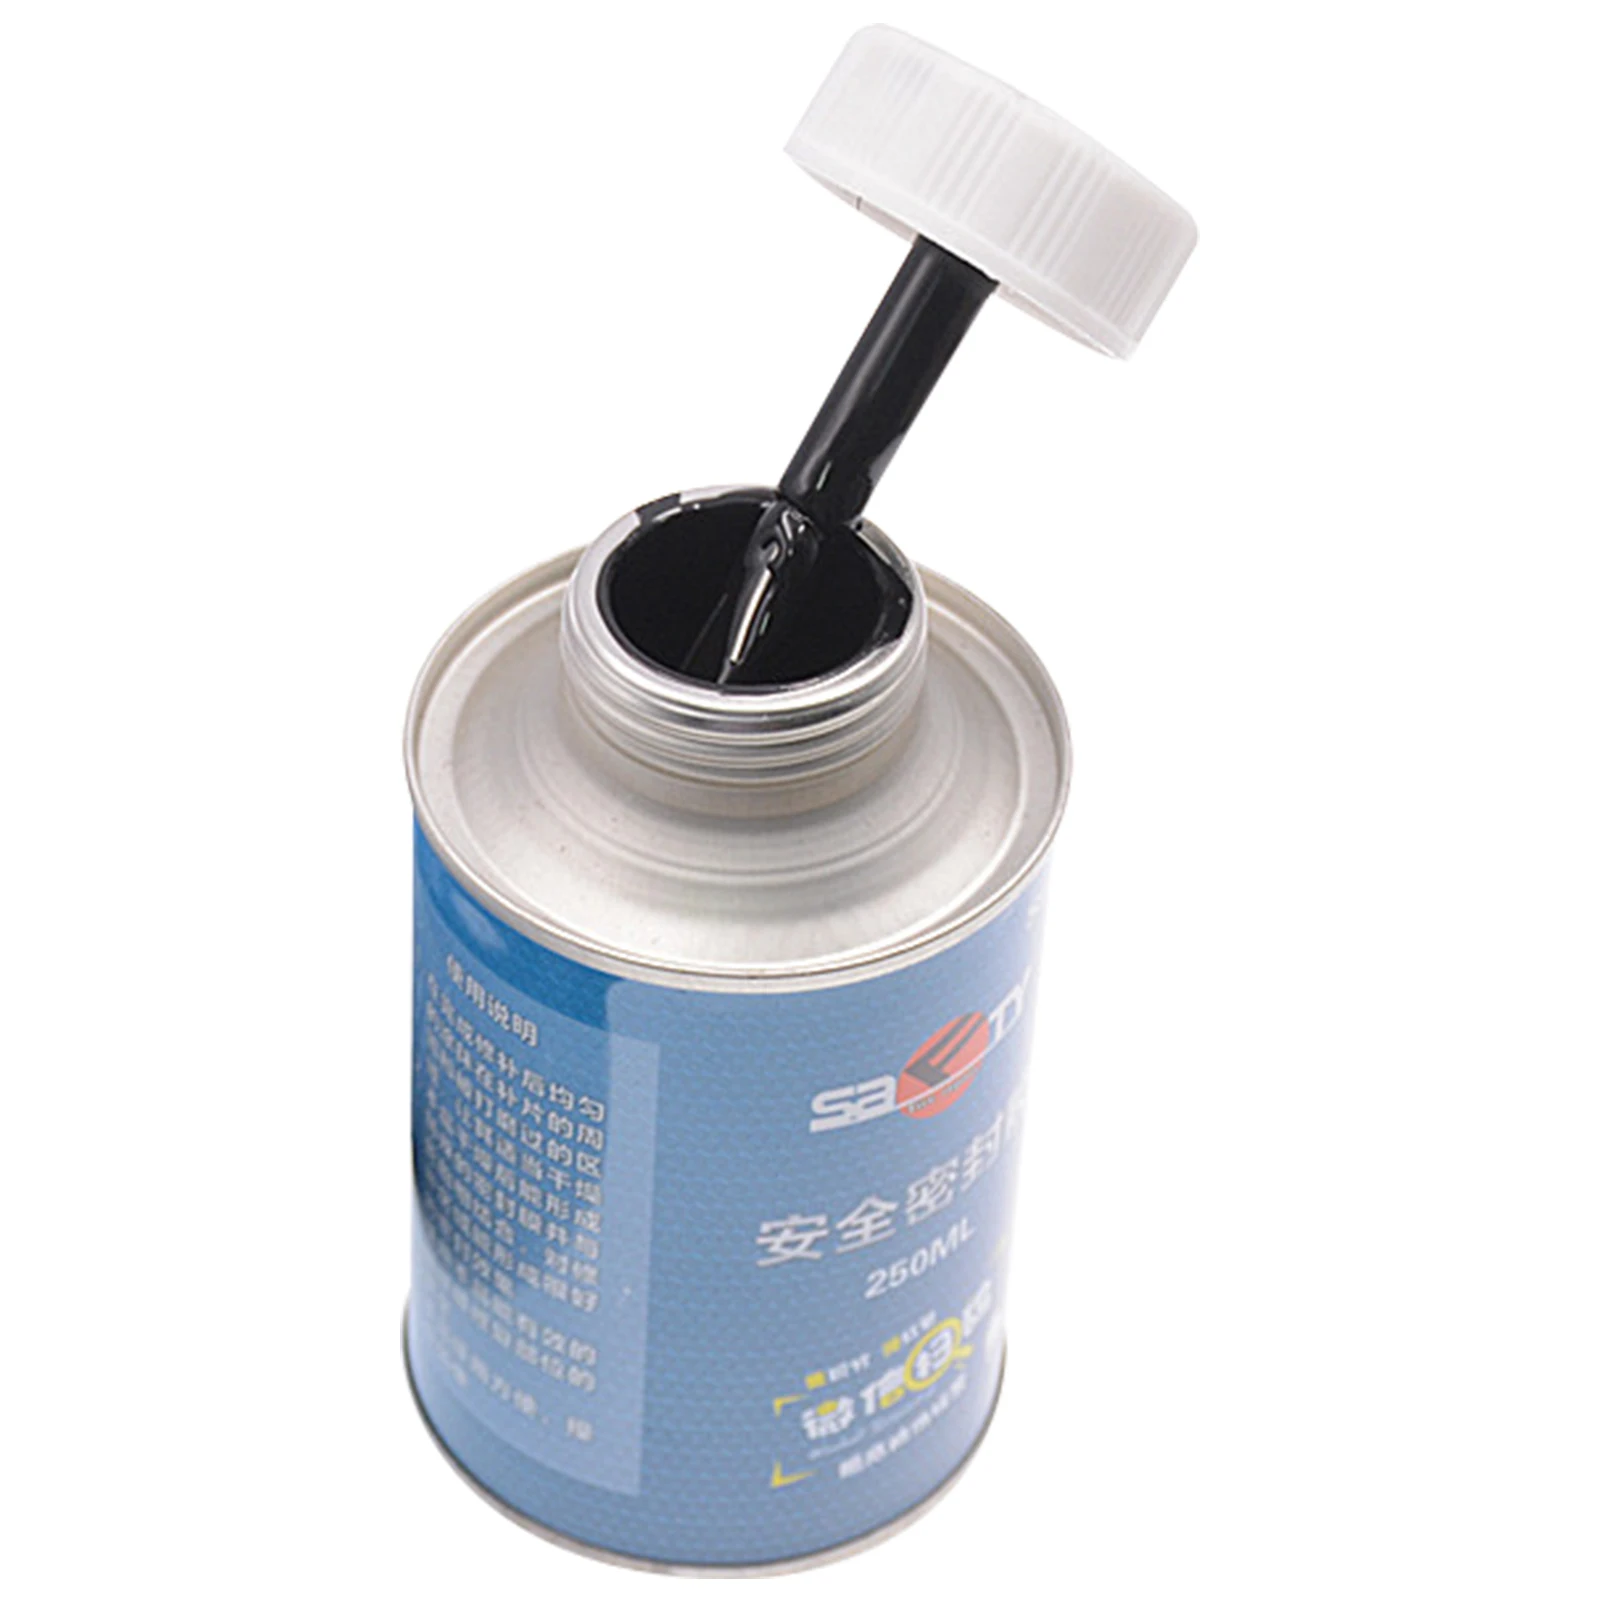 Tire & Tube Sealant Puncture Repair Sealant Excellent Prevent and Repair for Off-Highway Tires and Tubes Eco-Friendly 250ml.